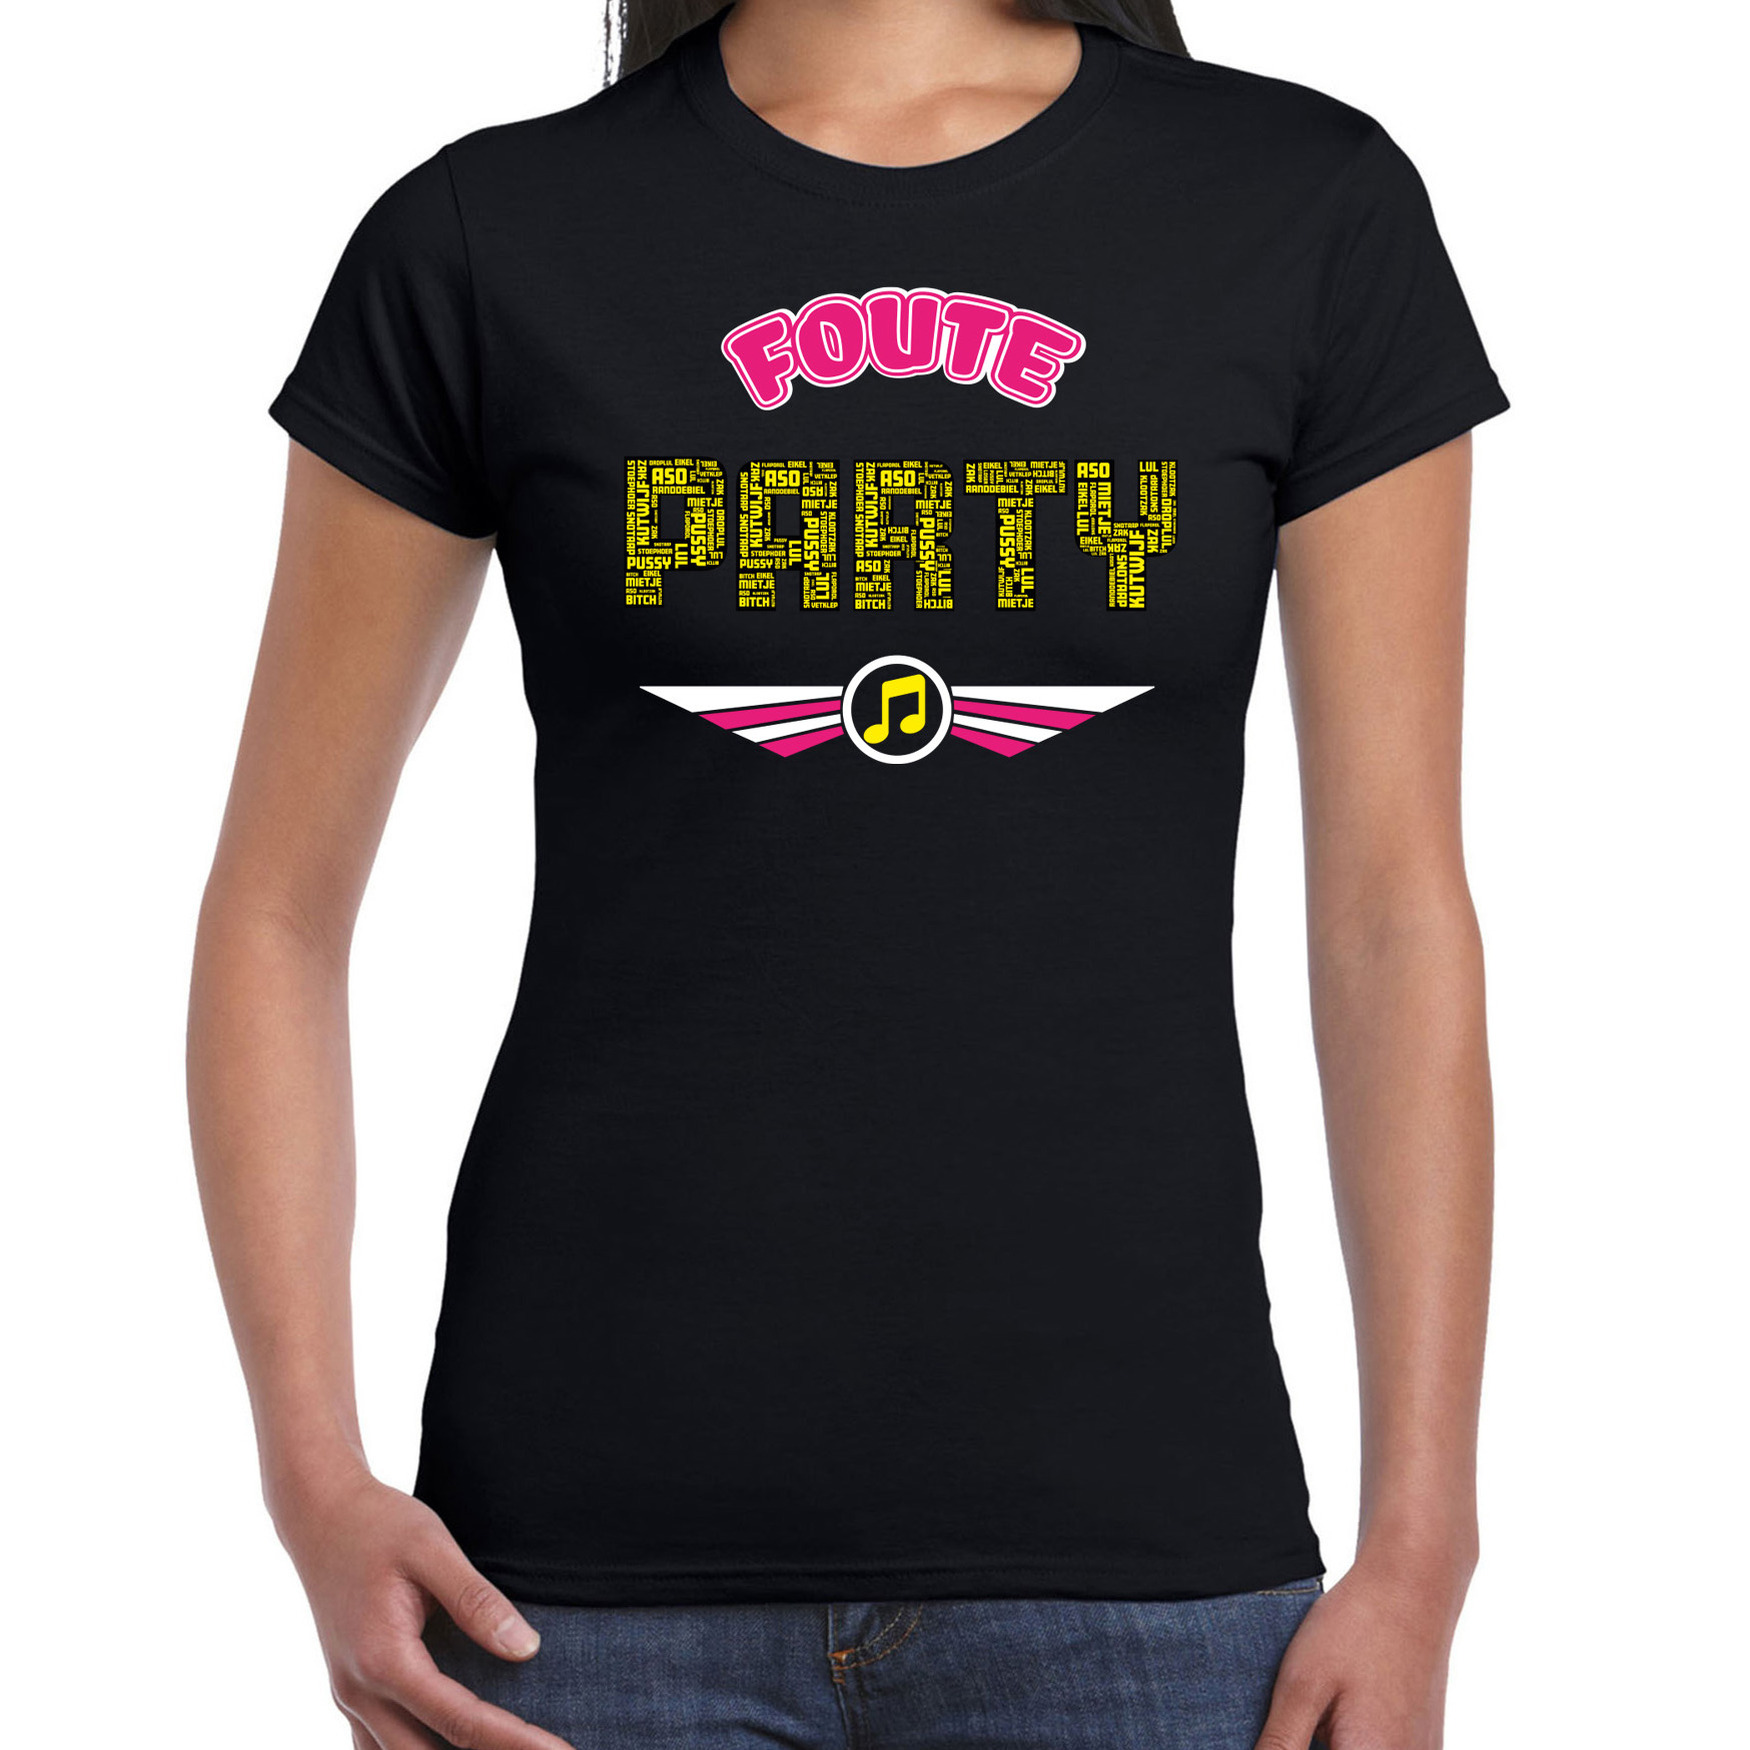 Foute party t-shirt dames zwart foute party outfit-kleding